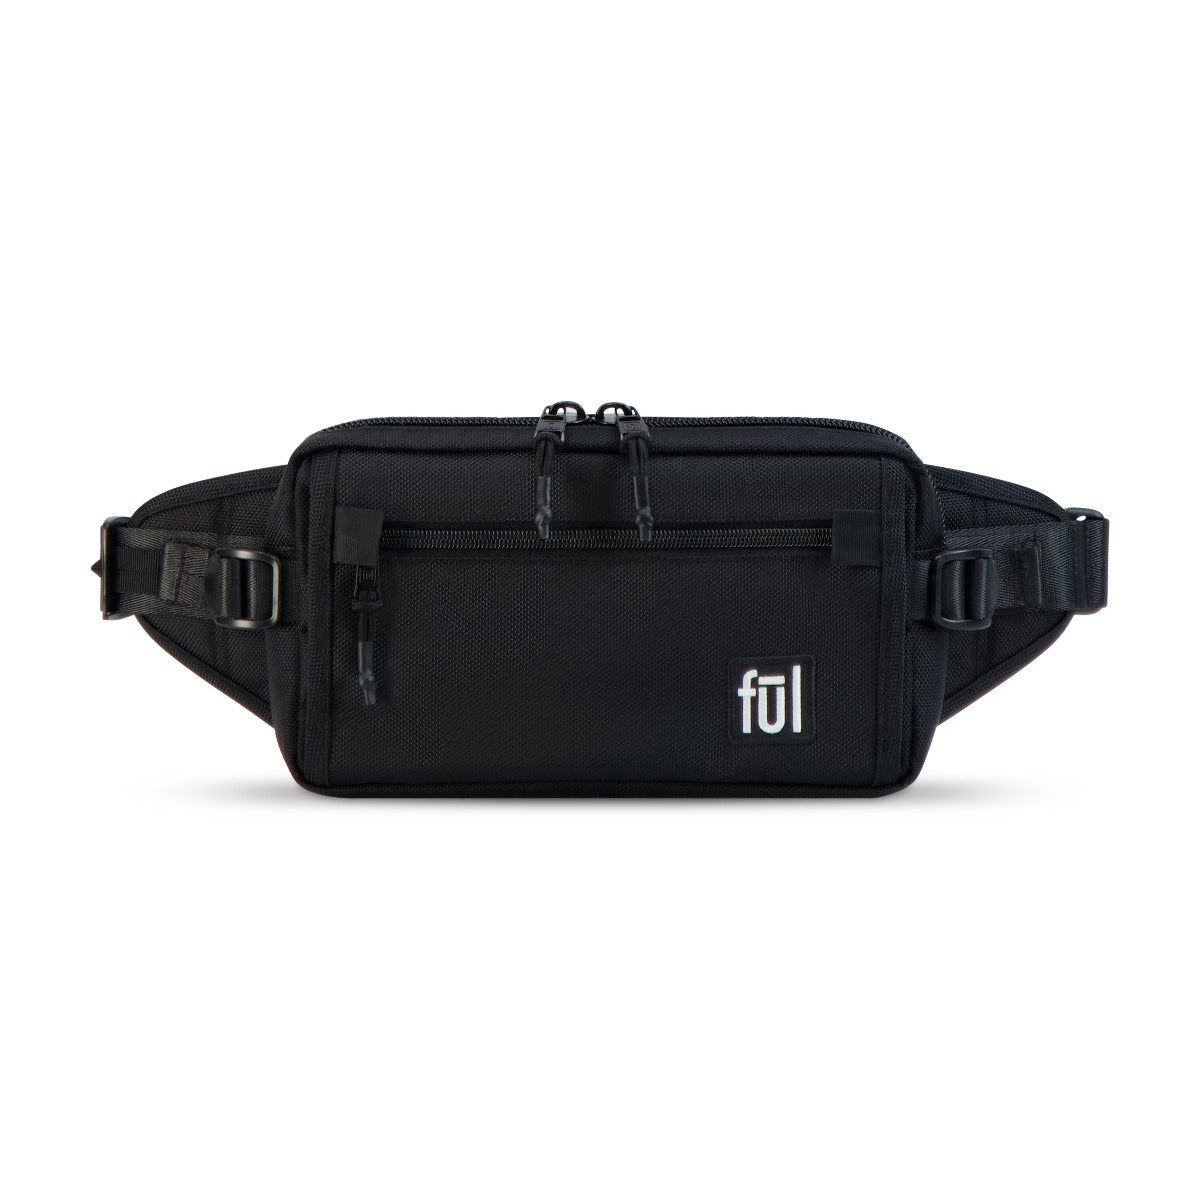 Ful Tactics collection scout waistpack black - best fanny packs for hiking